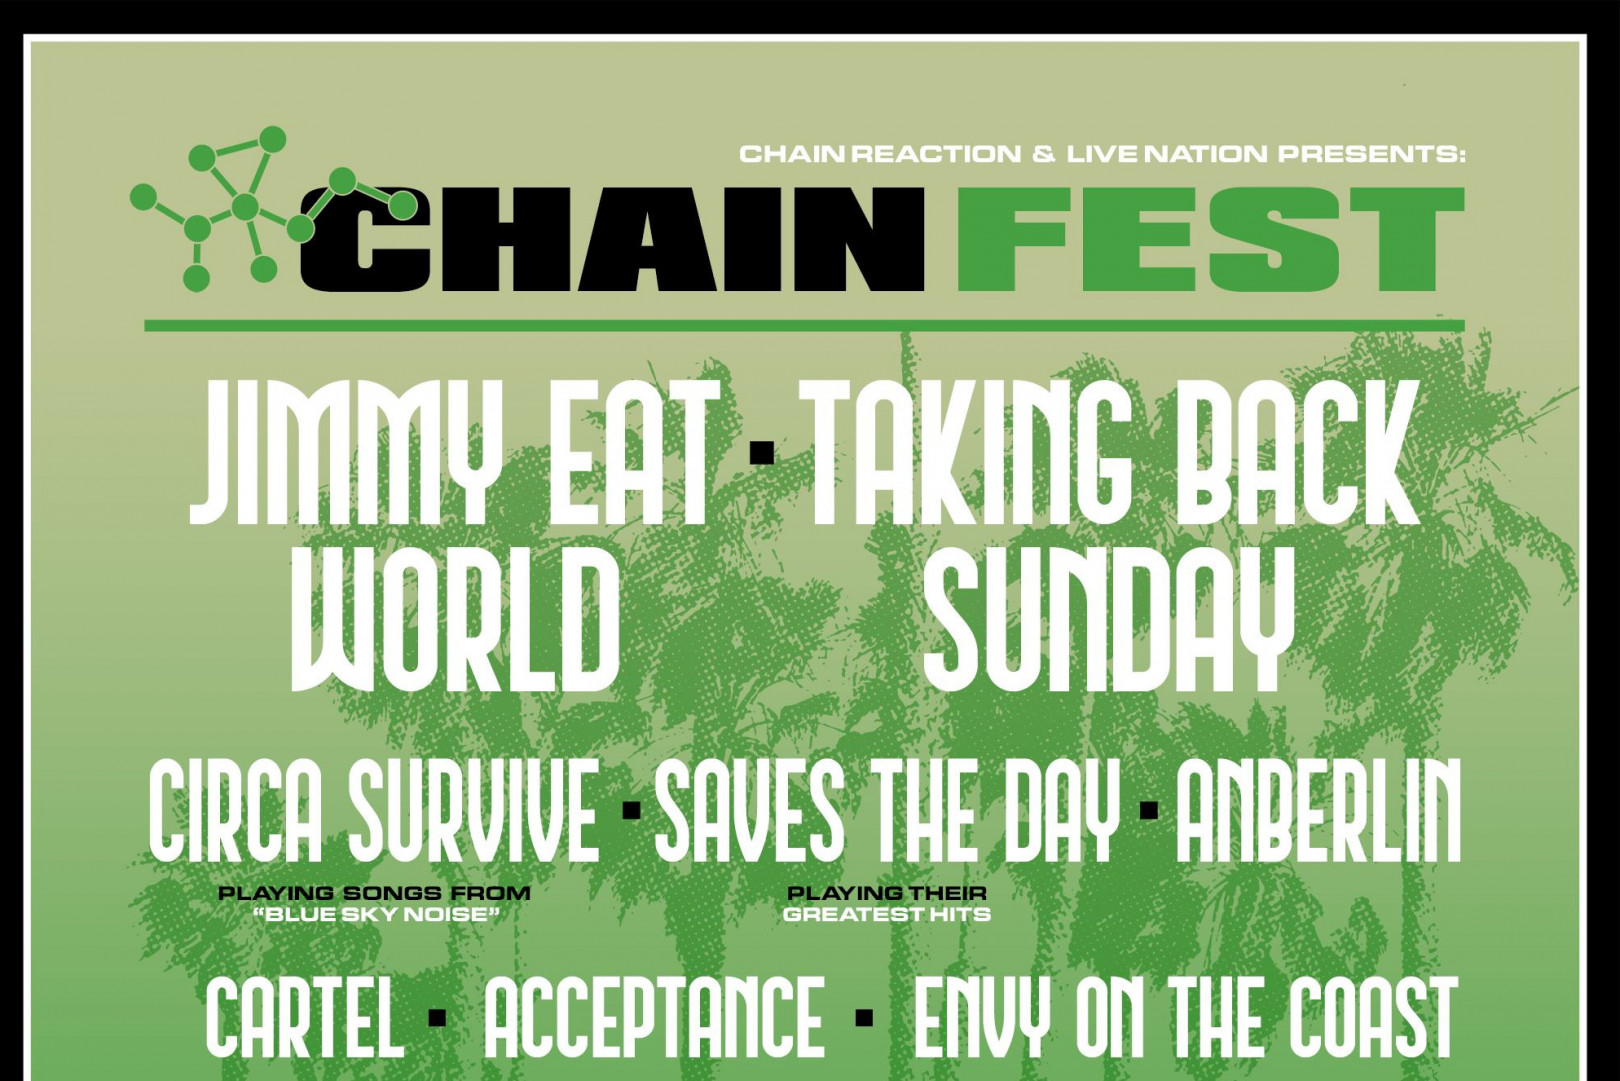 Chain Fest adds The Summer Set to the 2021 event